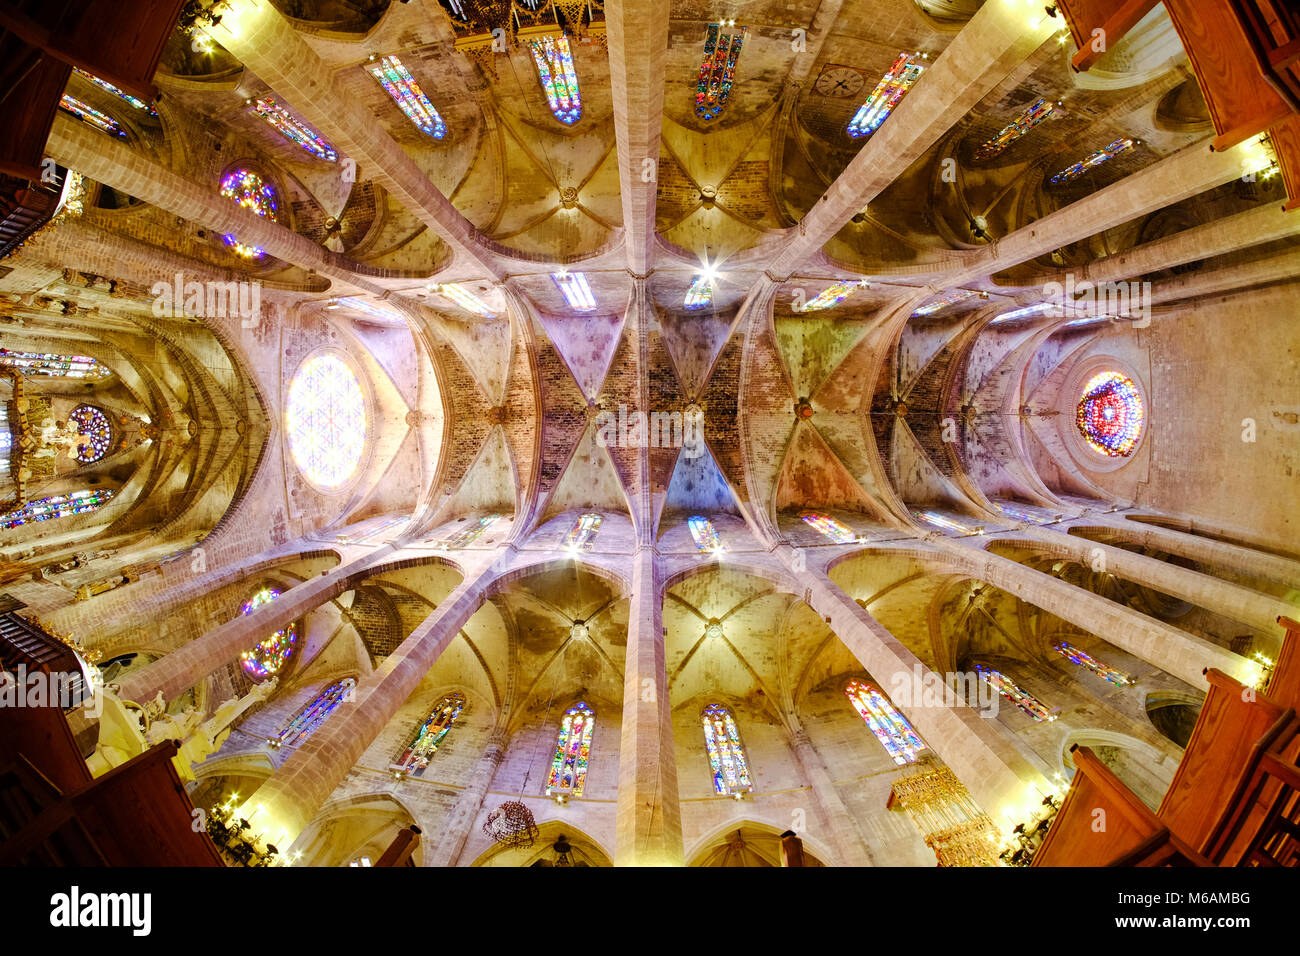 La Seu, the famous catholic medieval cathedral in Palma De Mallorca, interior view with fish-eye lens effect. Stock Photo